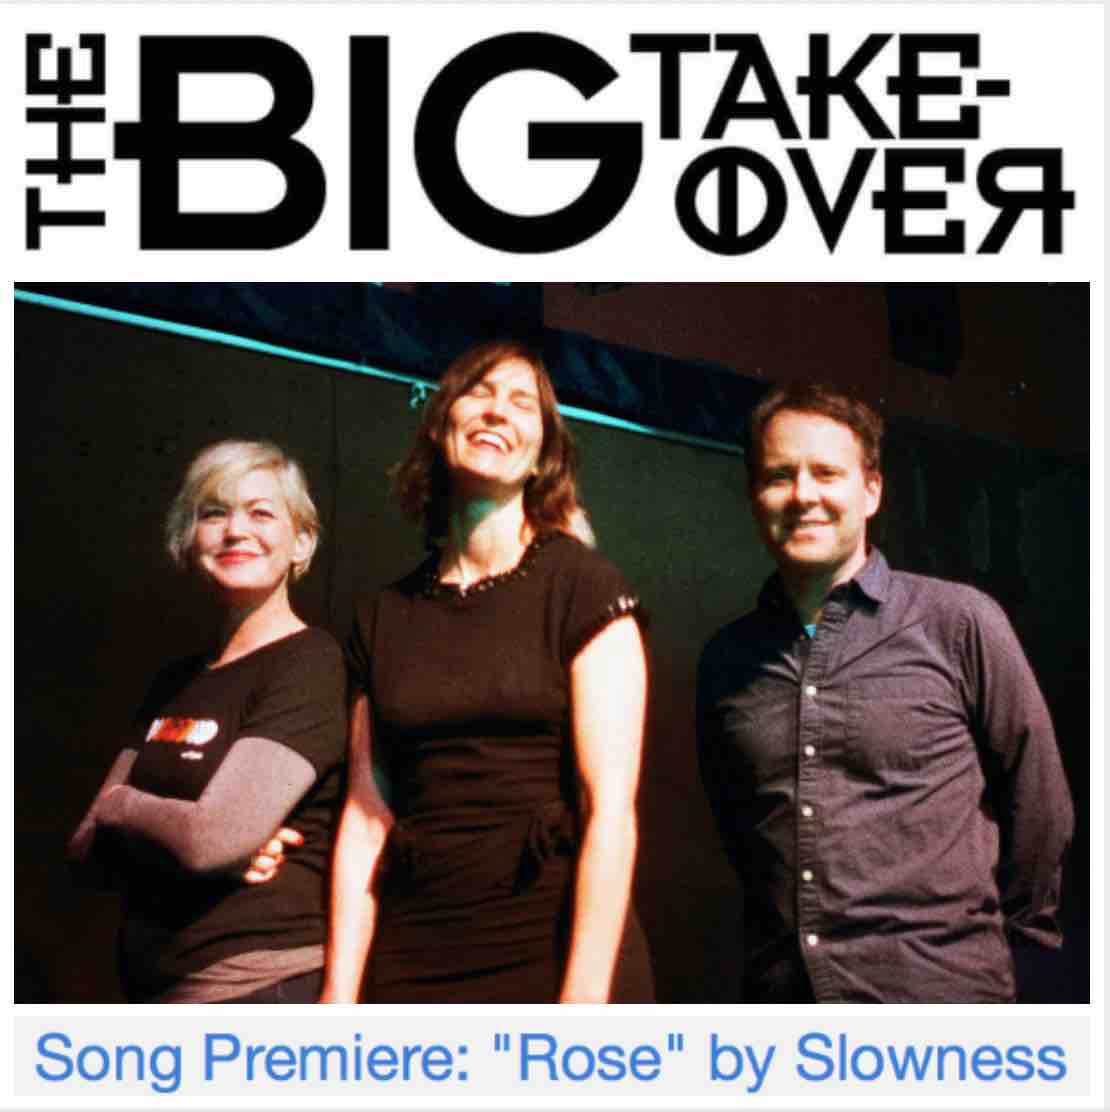 NYC's @BigTakeoverMag is premiering 'Rose', the lead single off the new (and long-awaited) 'Berths' album from @SlownessMusic. The single is out in early May with the LP coming on vinyl and digitally via @Schoolkids Records ~ goo.gl/duWw95